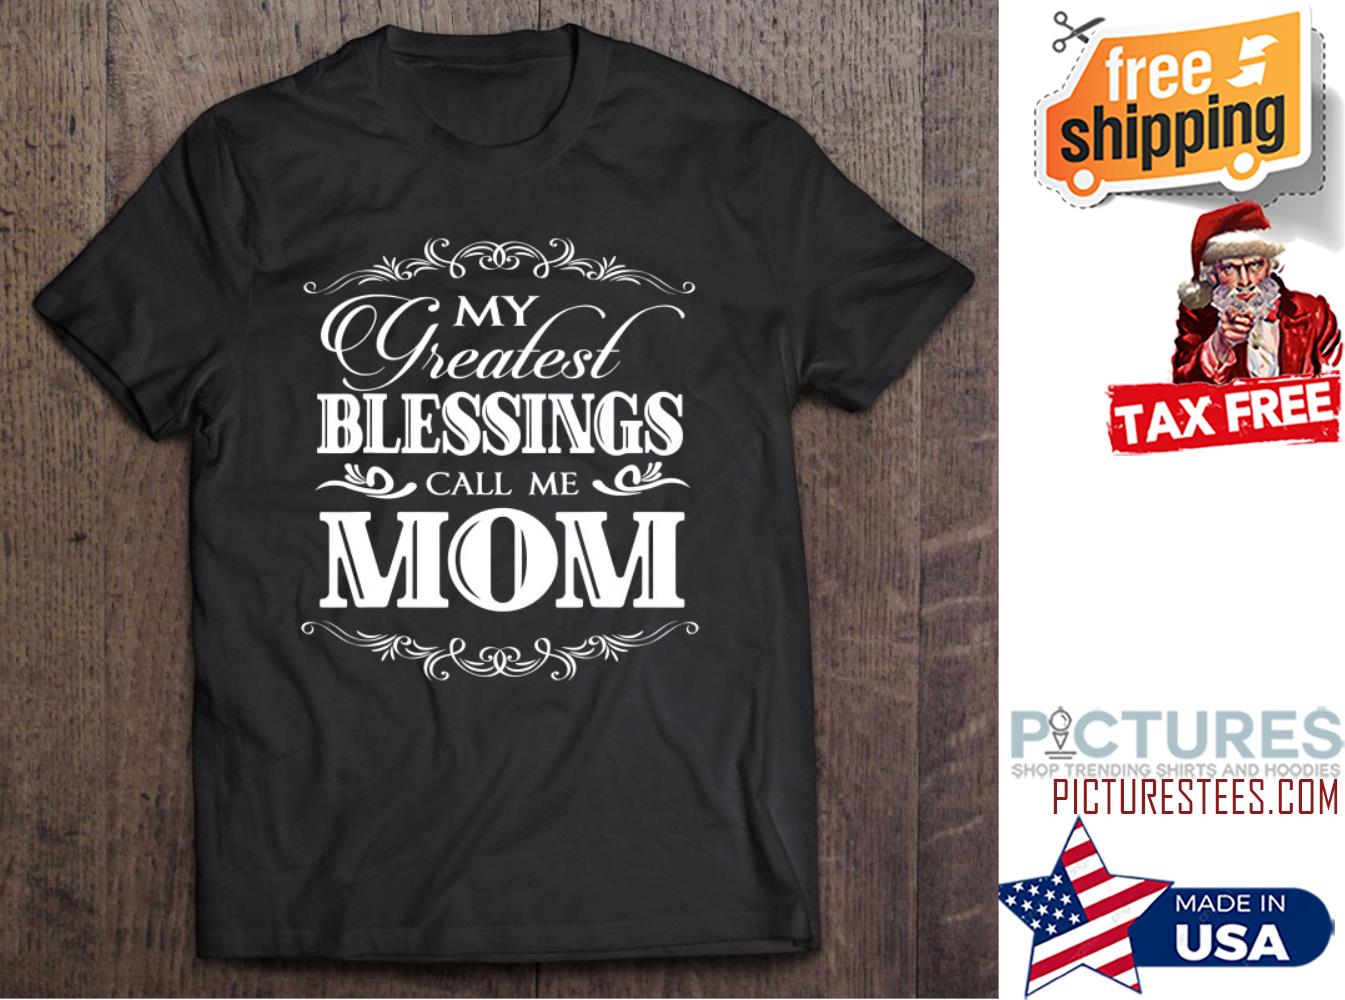 Adult Unisex T-Shirt My Greatest Blessing